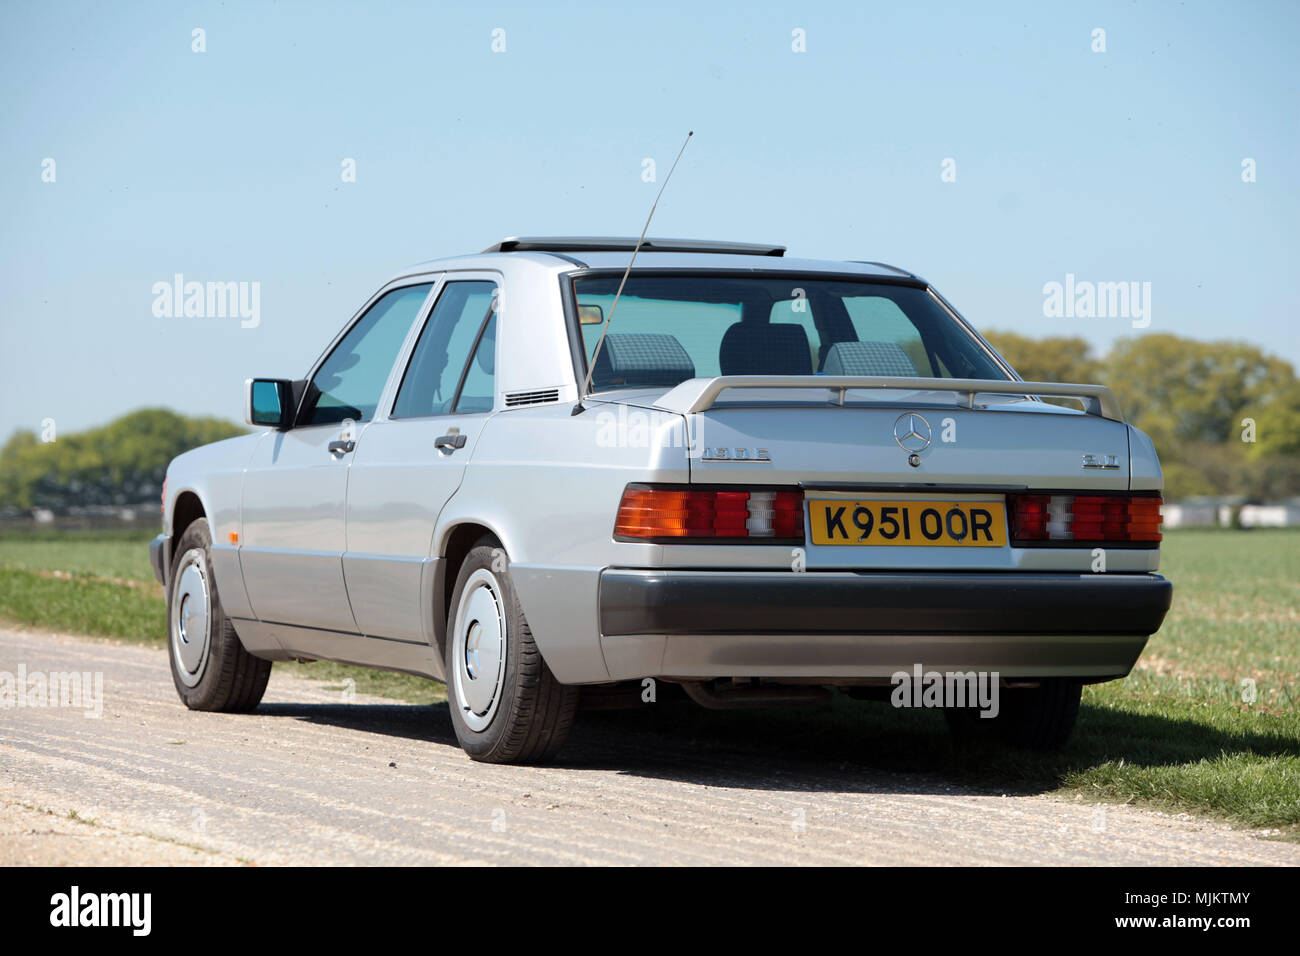 A 1993 Mercedes Benz 190e W1 2 0 Petrol Automatic Photographed In Wiltshire Uk In 18 Stock Photo Alamy